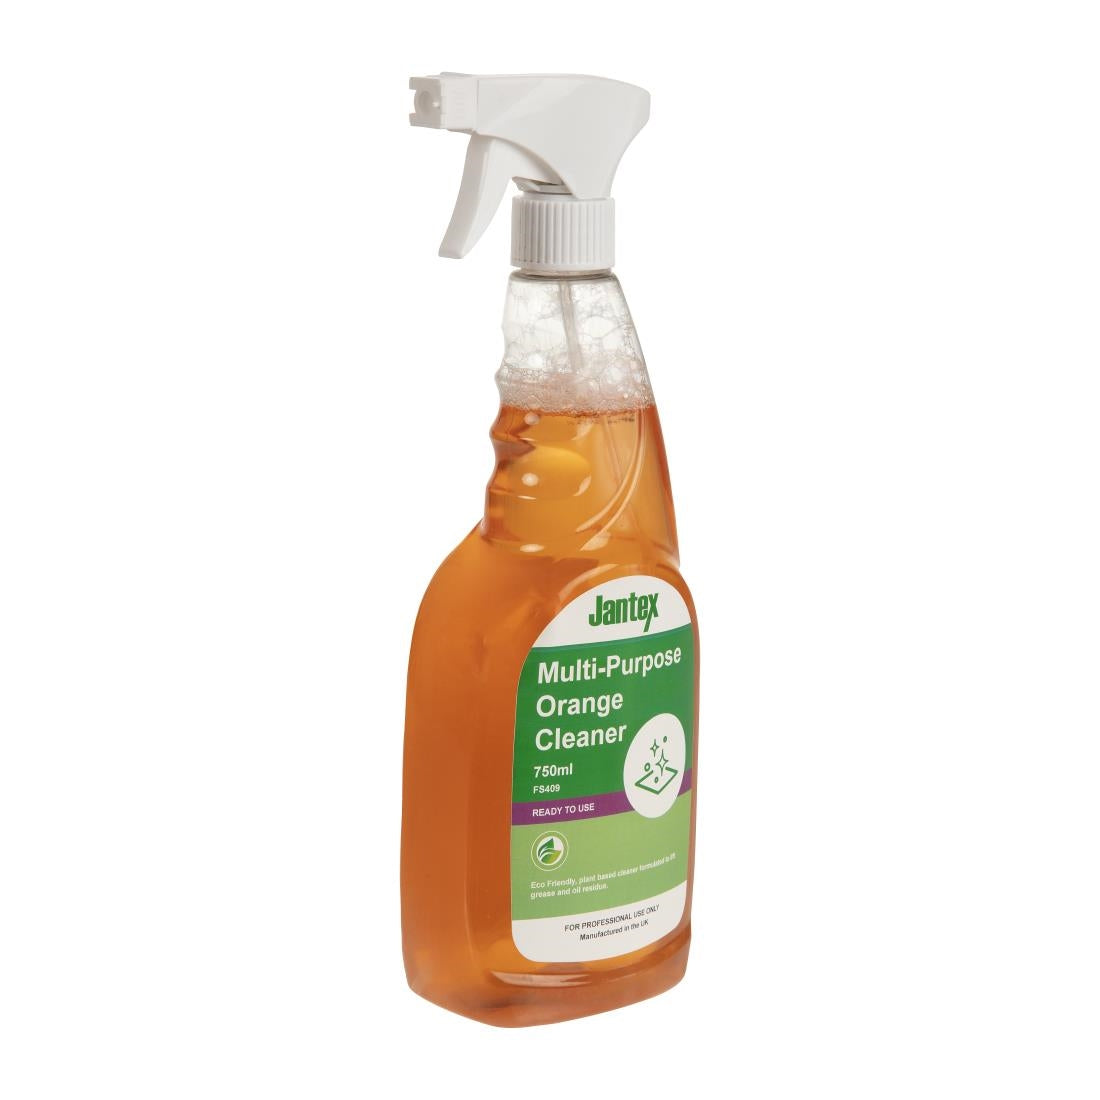 Jantex Green Orange Multipurpose Cleaner Ready To Use 750ml JD Catering Equipment Solutions Ltd